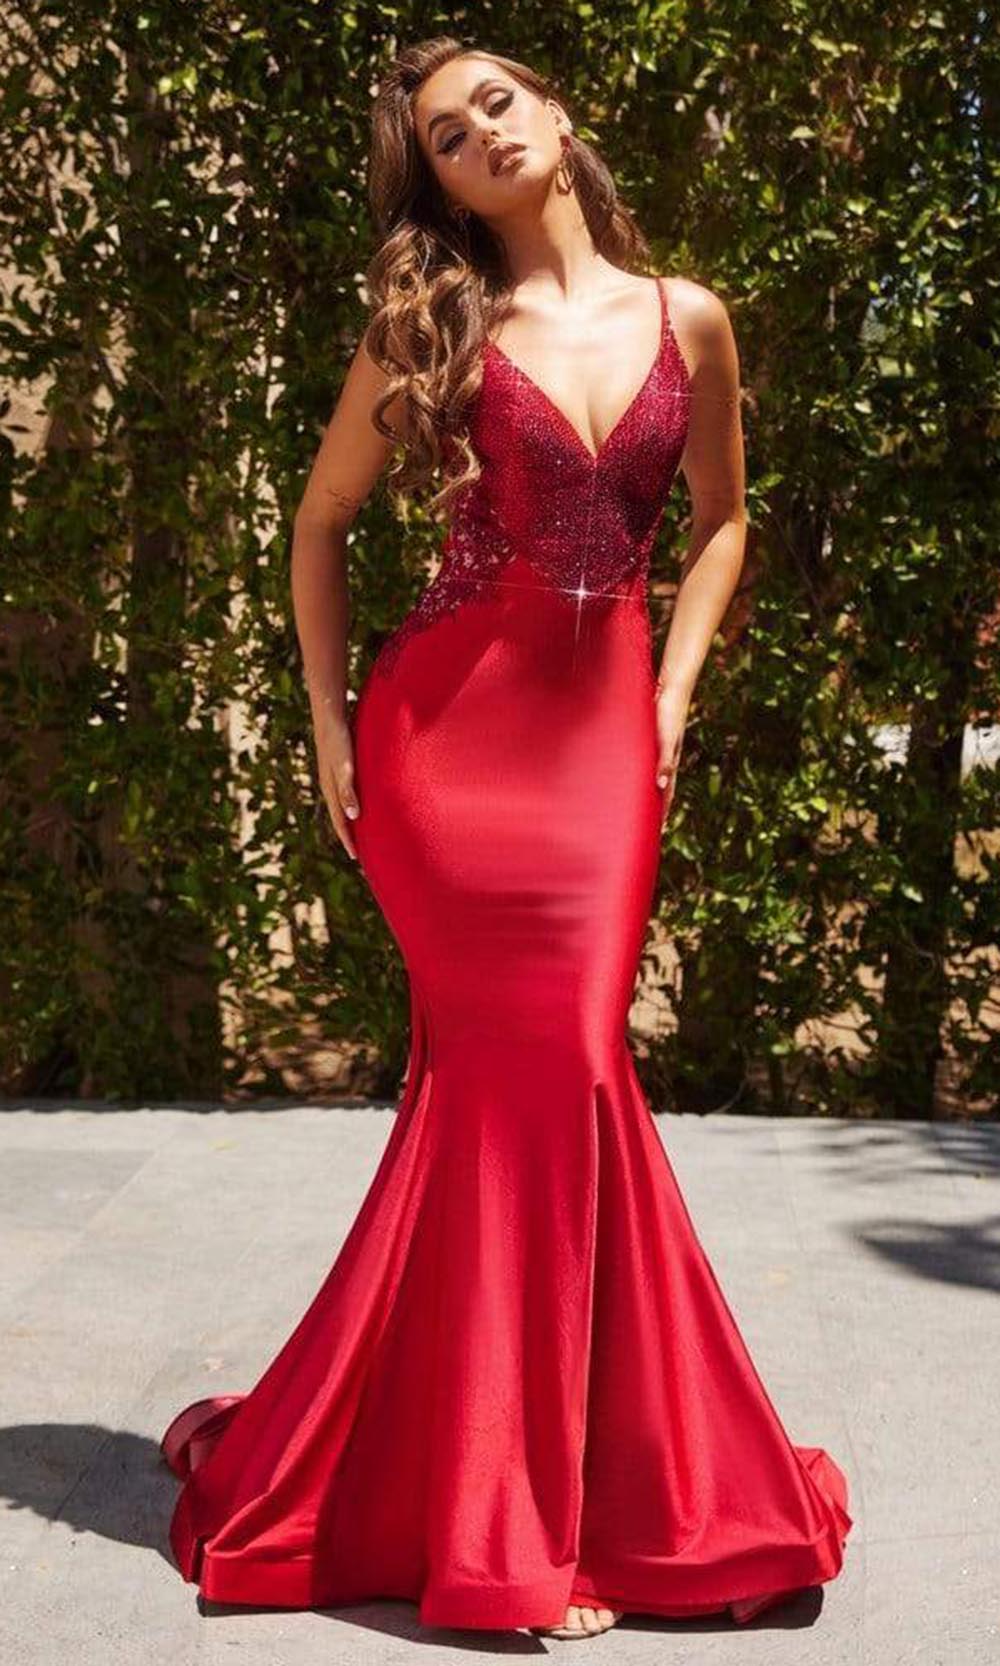 Image of Portia and Scarlett - Ps22641 Glittered Bod V Neck Mermaid Gown